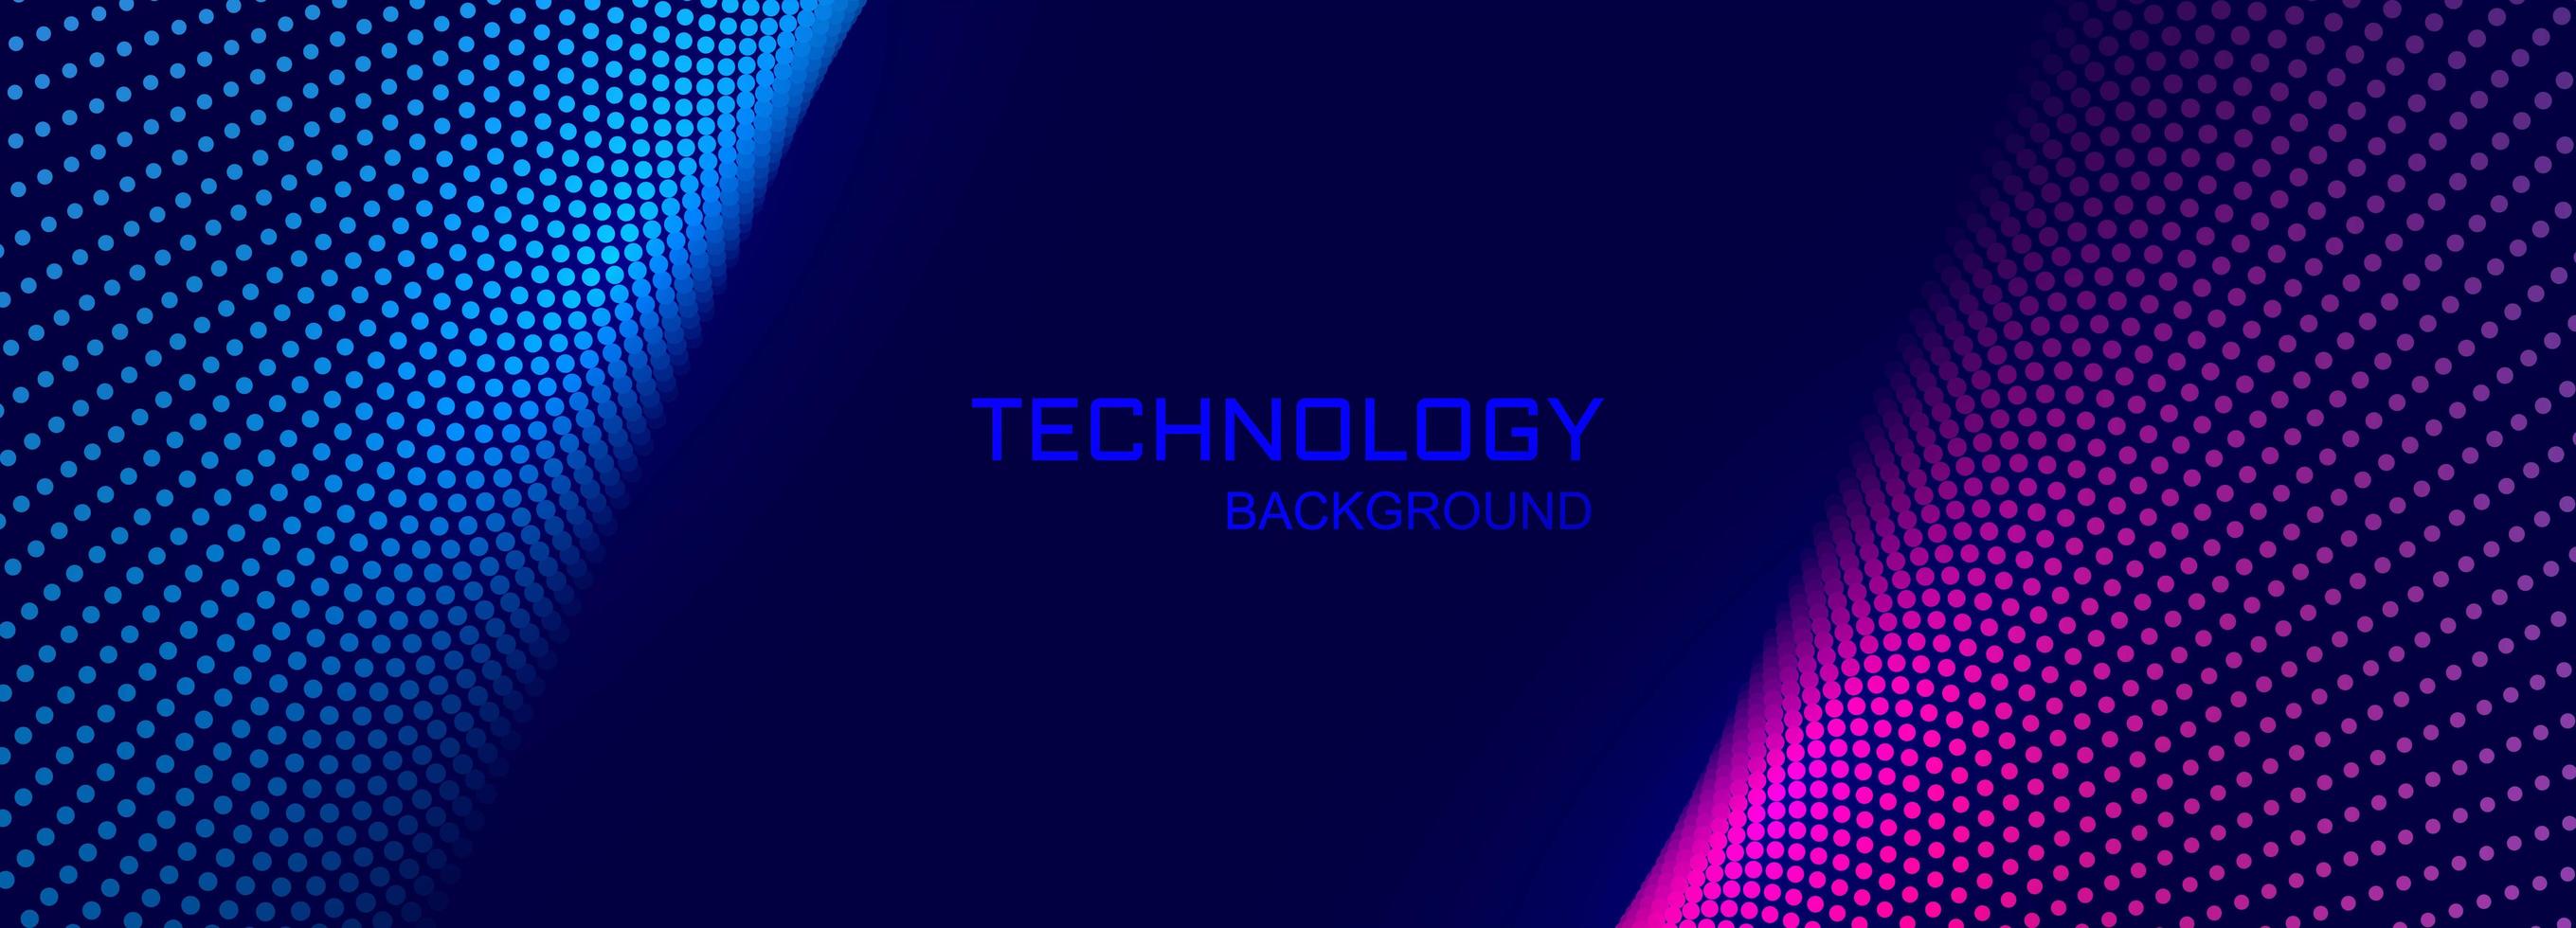 Technology banner background with connecting dotted design vector